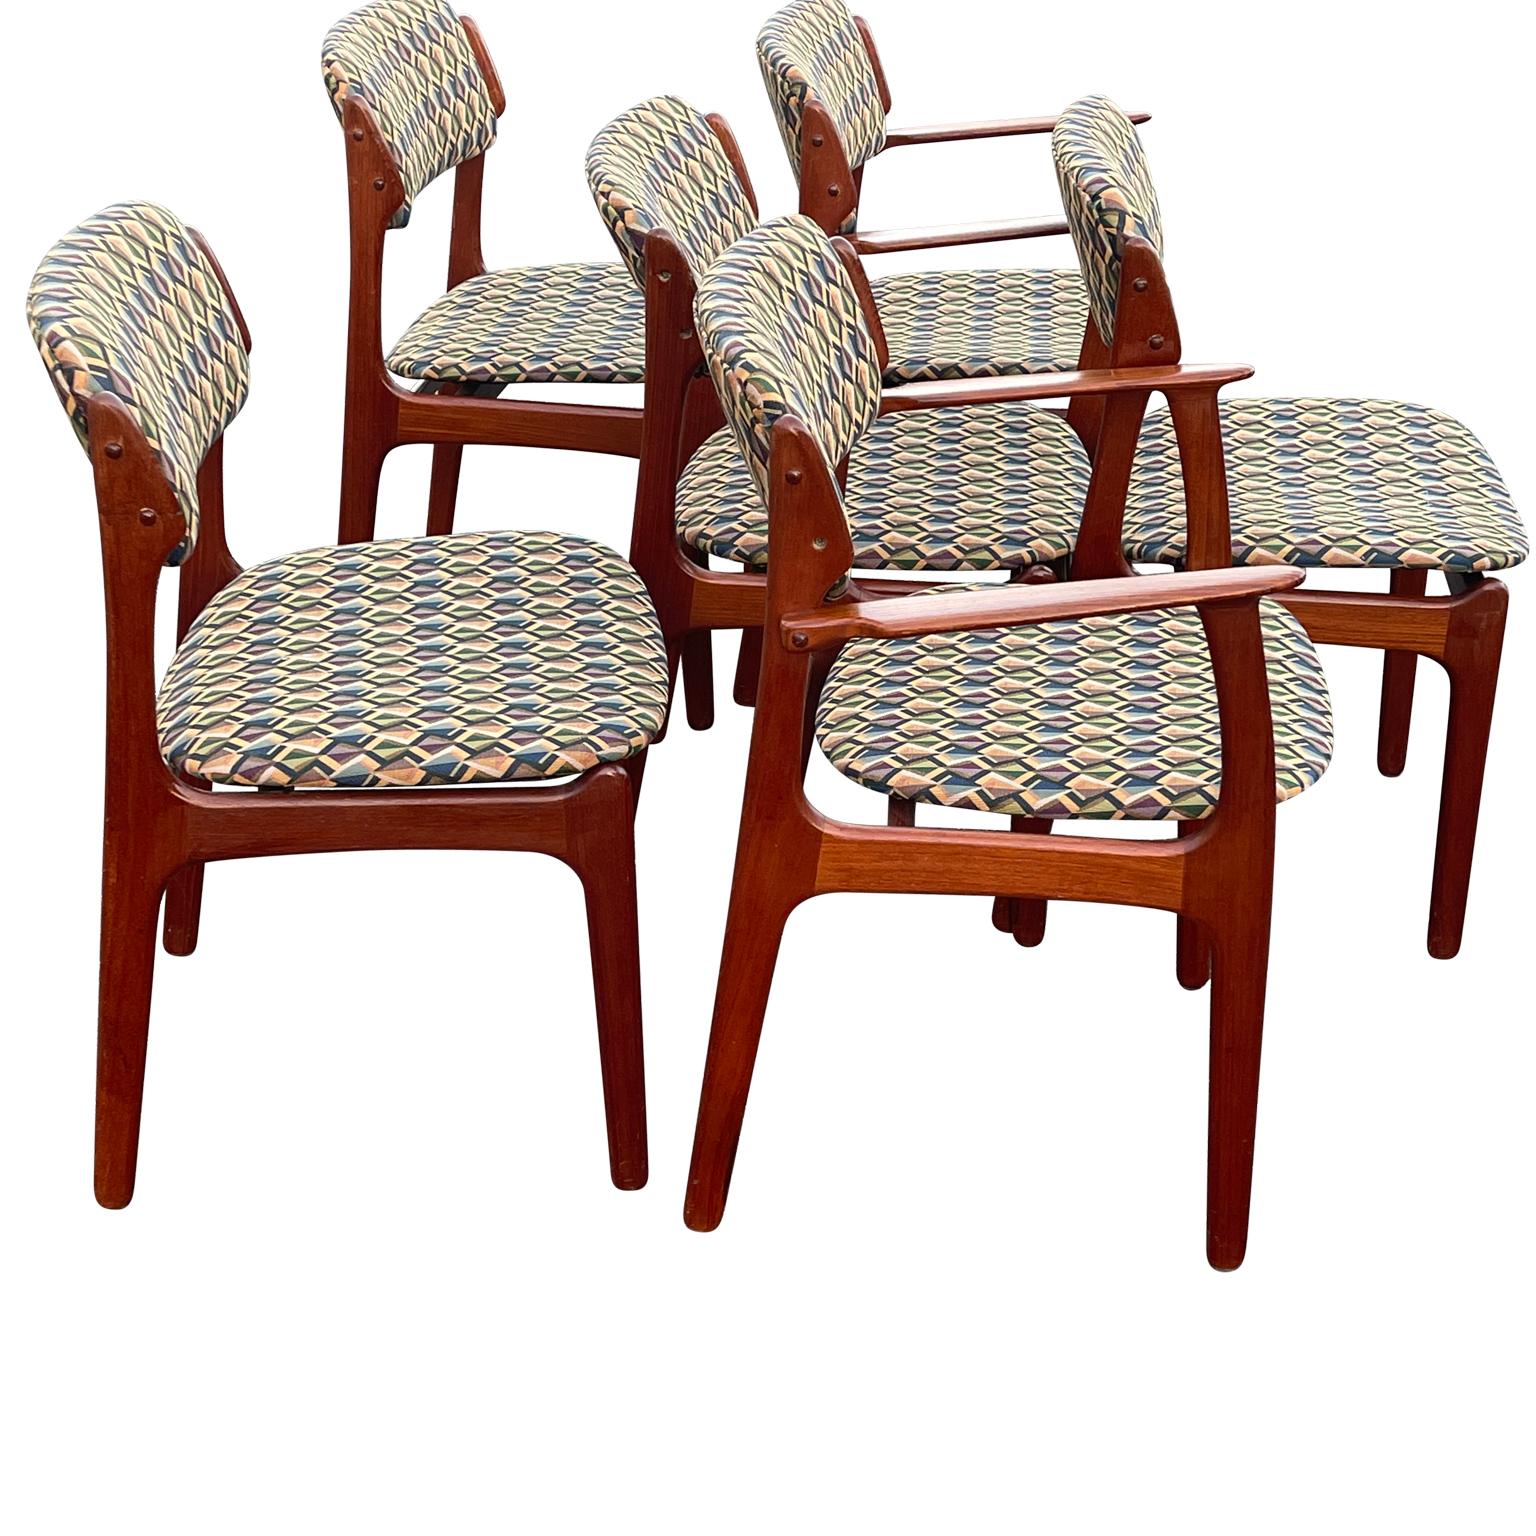 20th Century Set of 6 Danish Dining Chairs by Domus Odense, Denmark Scandinavia